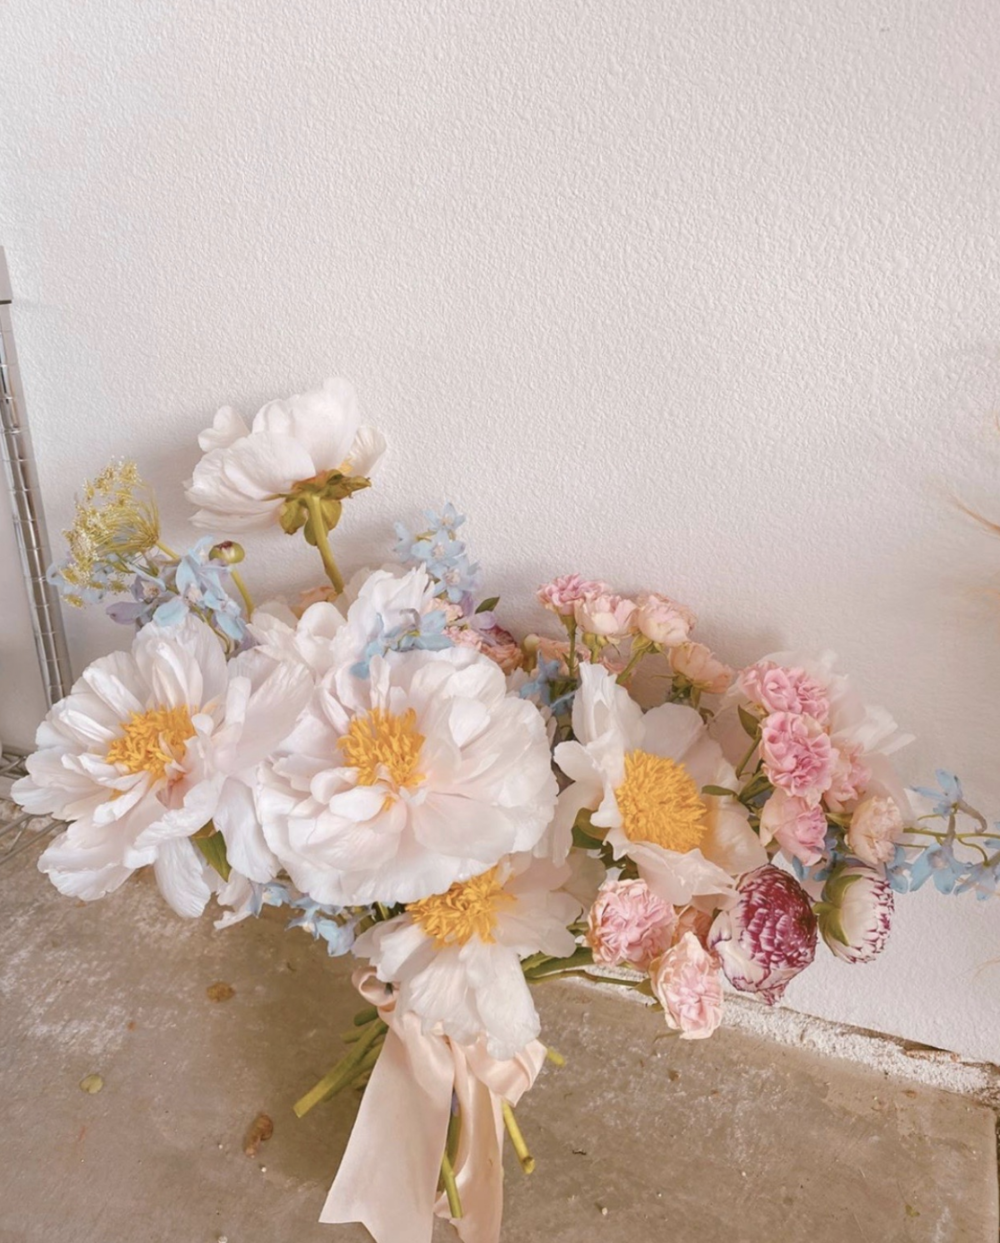 Tips for picking your wedding florals by Hilary Kao Photo. This blog post includes wedding details, bridal fashion, wedding tips, bridal portraits. Book your Los Angeles wedding and browse the blog for more inspiration #photography #weddingplanning #weddingtips #weddingphotography #LosAngelesphotographer